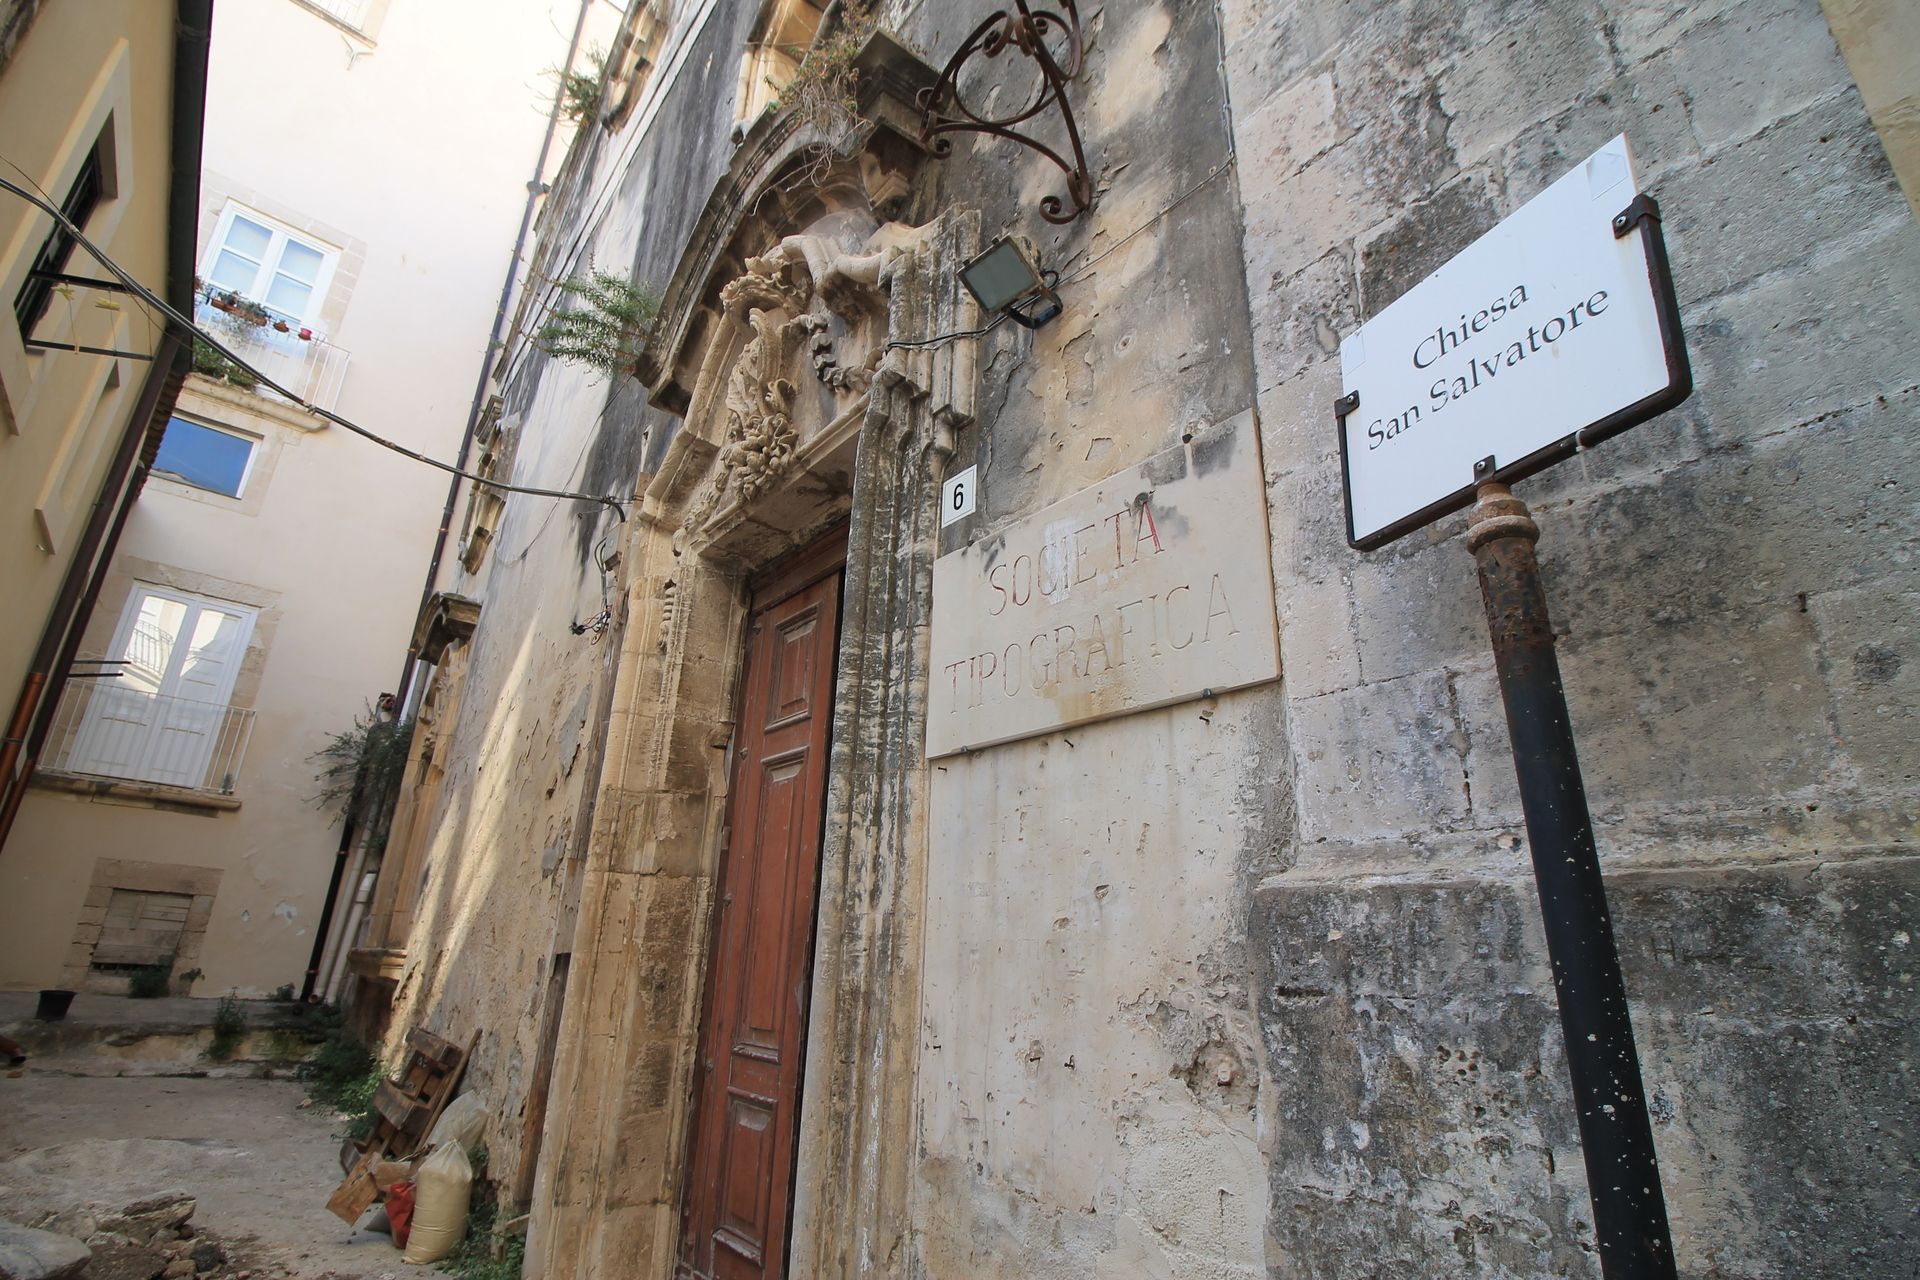 For sale real estate transaction in city Siracusa Sicilia